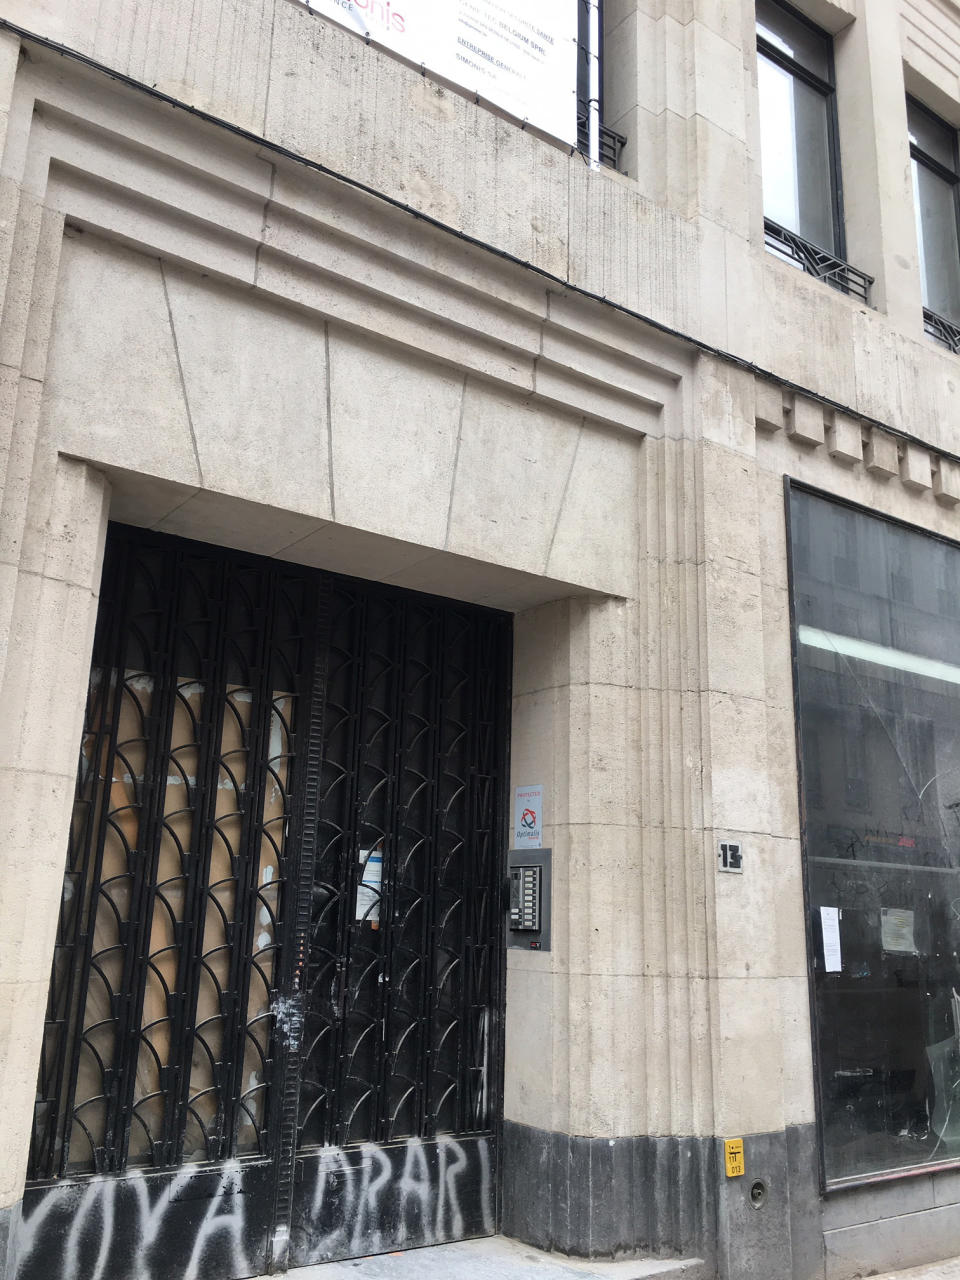 This Tuesday, Feb. 5, 2019 photo shows the exterior of the address Rue des Poissonniers 13 in Brussels. The boarded-up building was supposedly the home of Mertens-Giraud Partners Management, but an Associated Press investigation has found that the firm is little more than a front for an elaborate undercover operation targeting security researchers, lawyers and a journalist. (AP Photo/Sylvain Plazy)